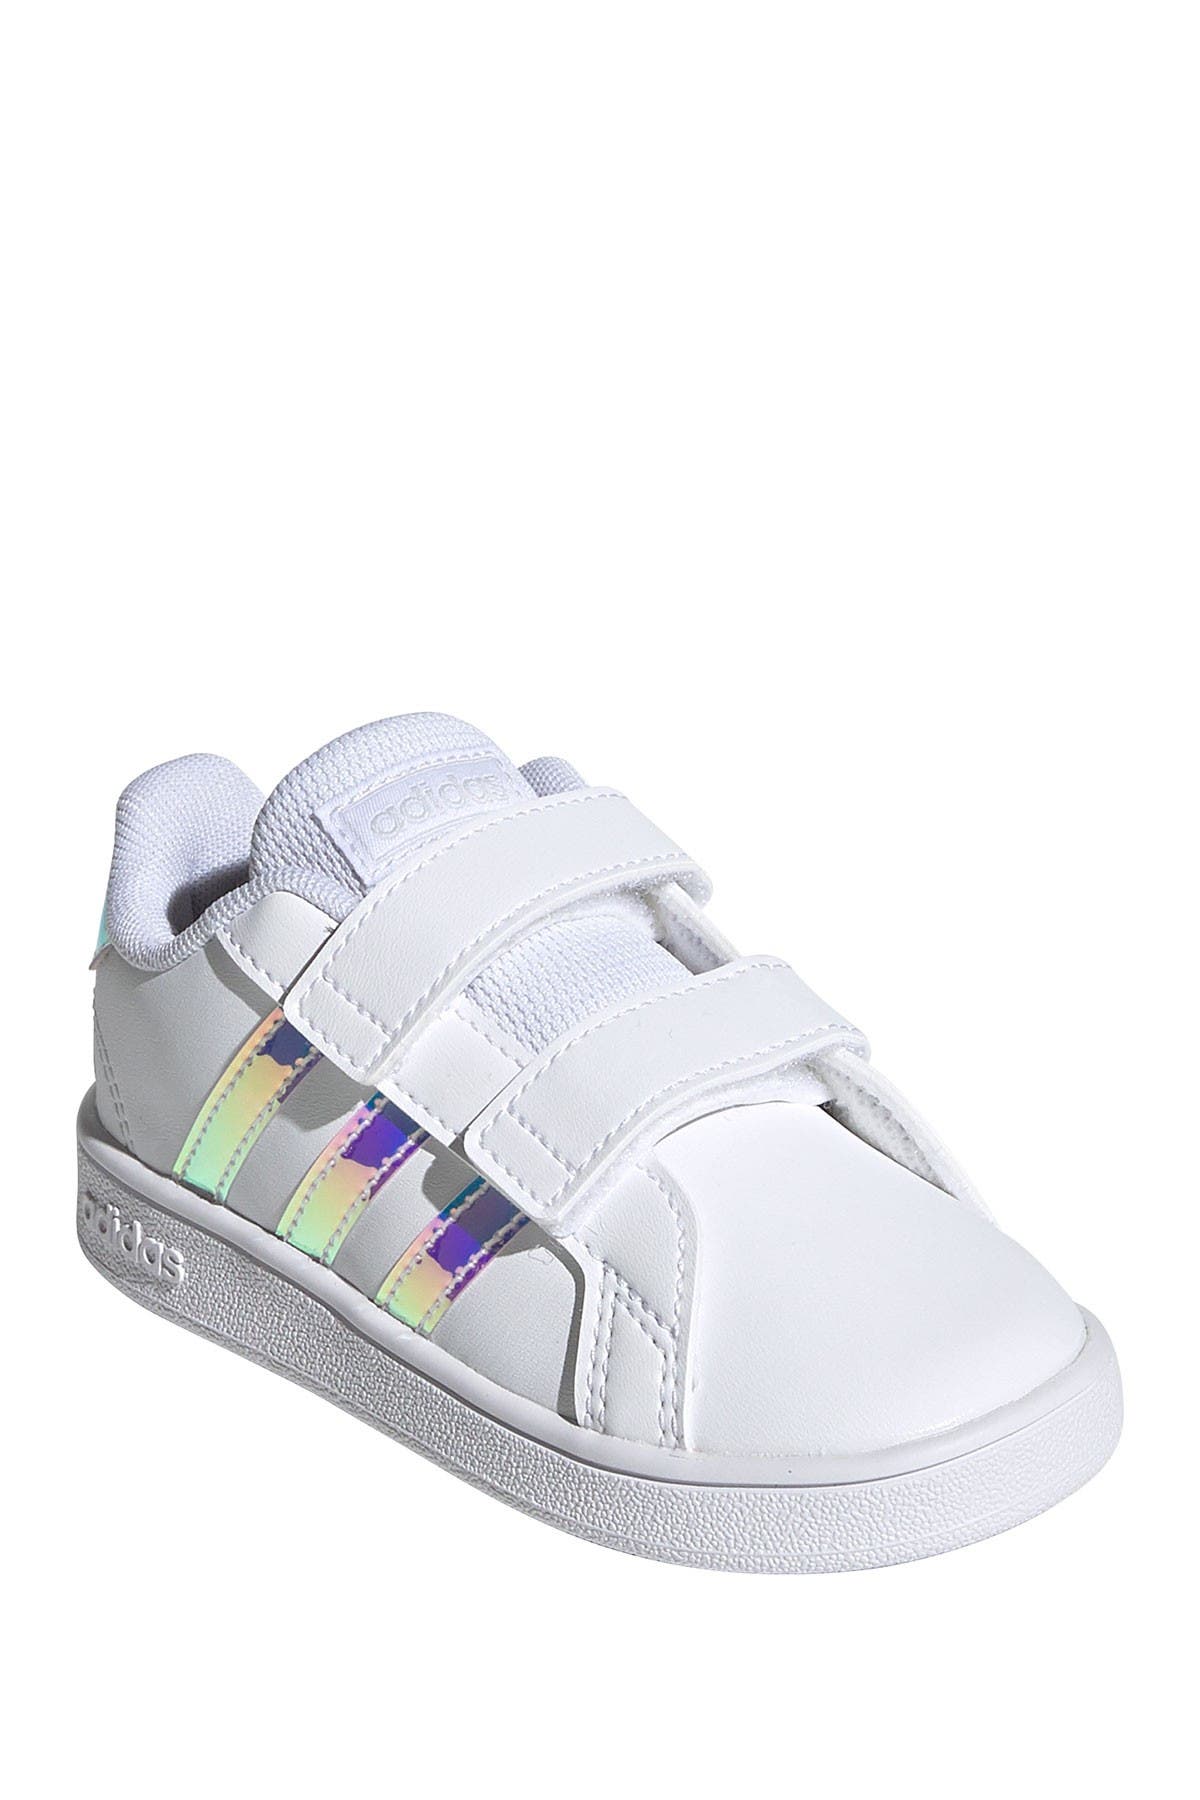 adidas little girl shoes